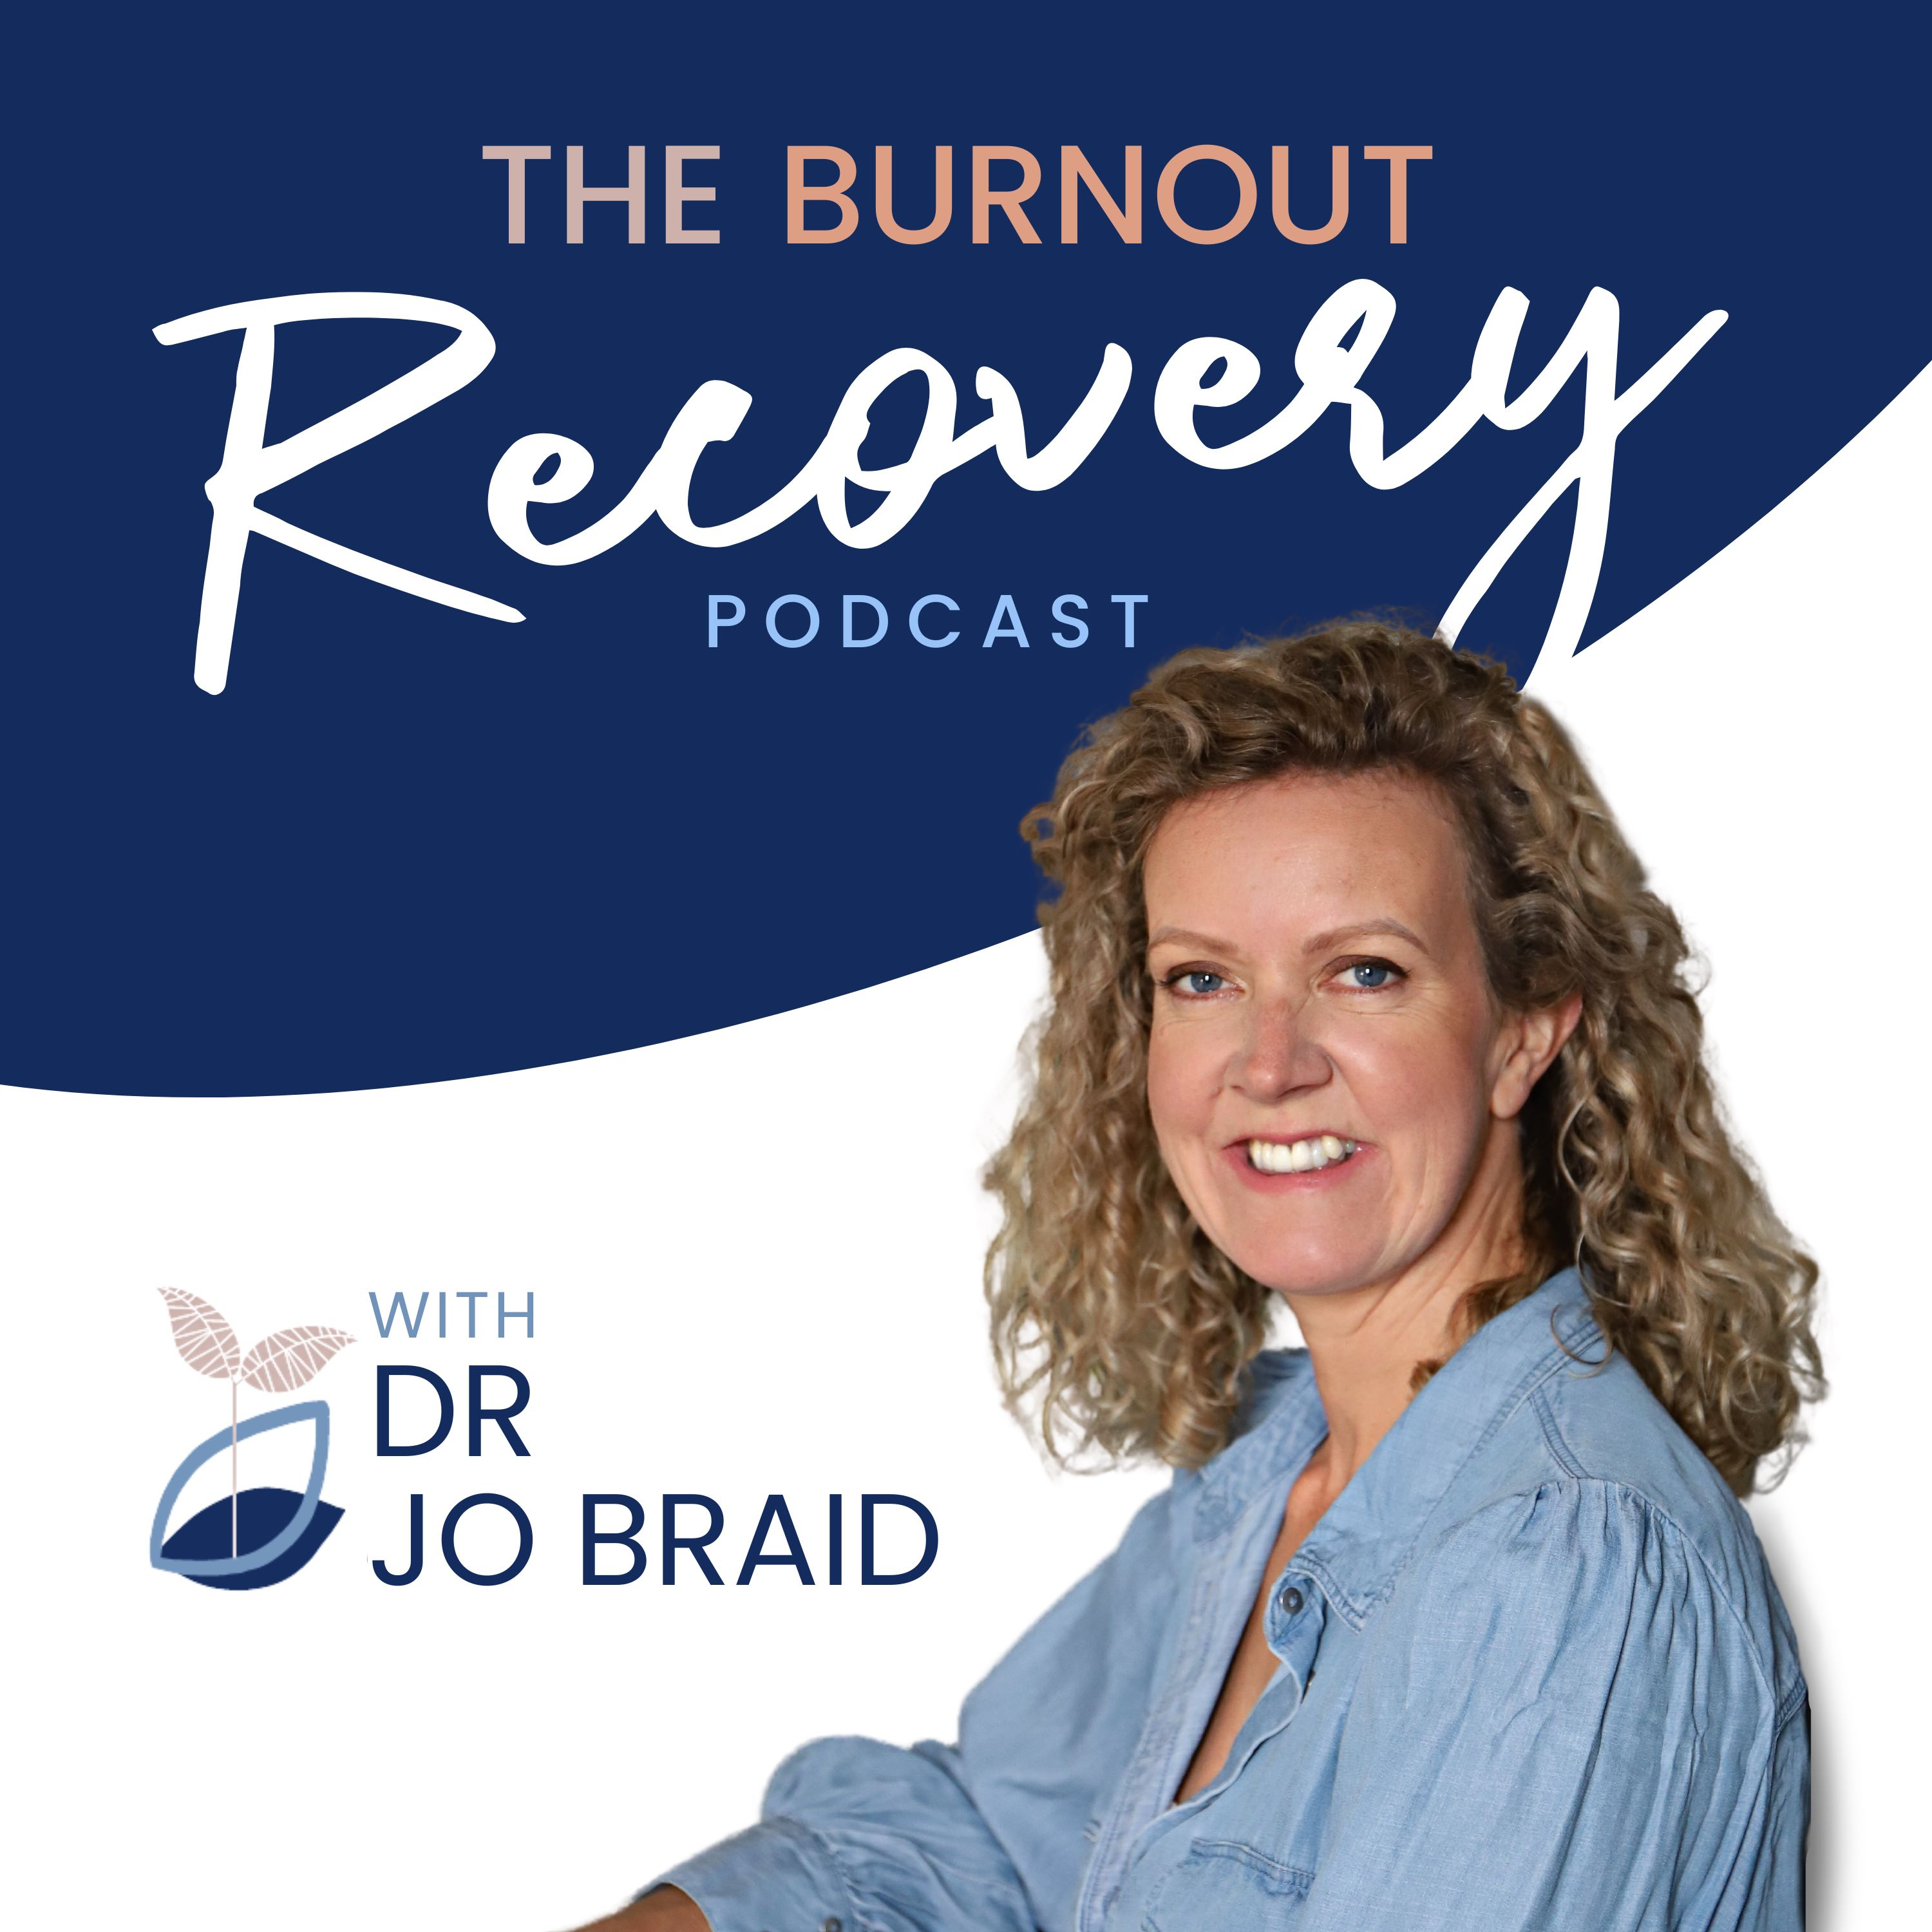 Connecting from the heart - Burnout Coach Dex Randall